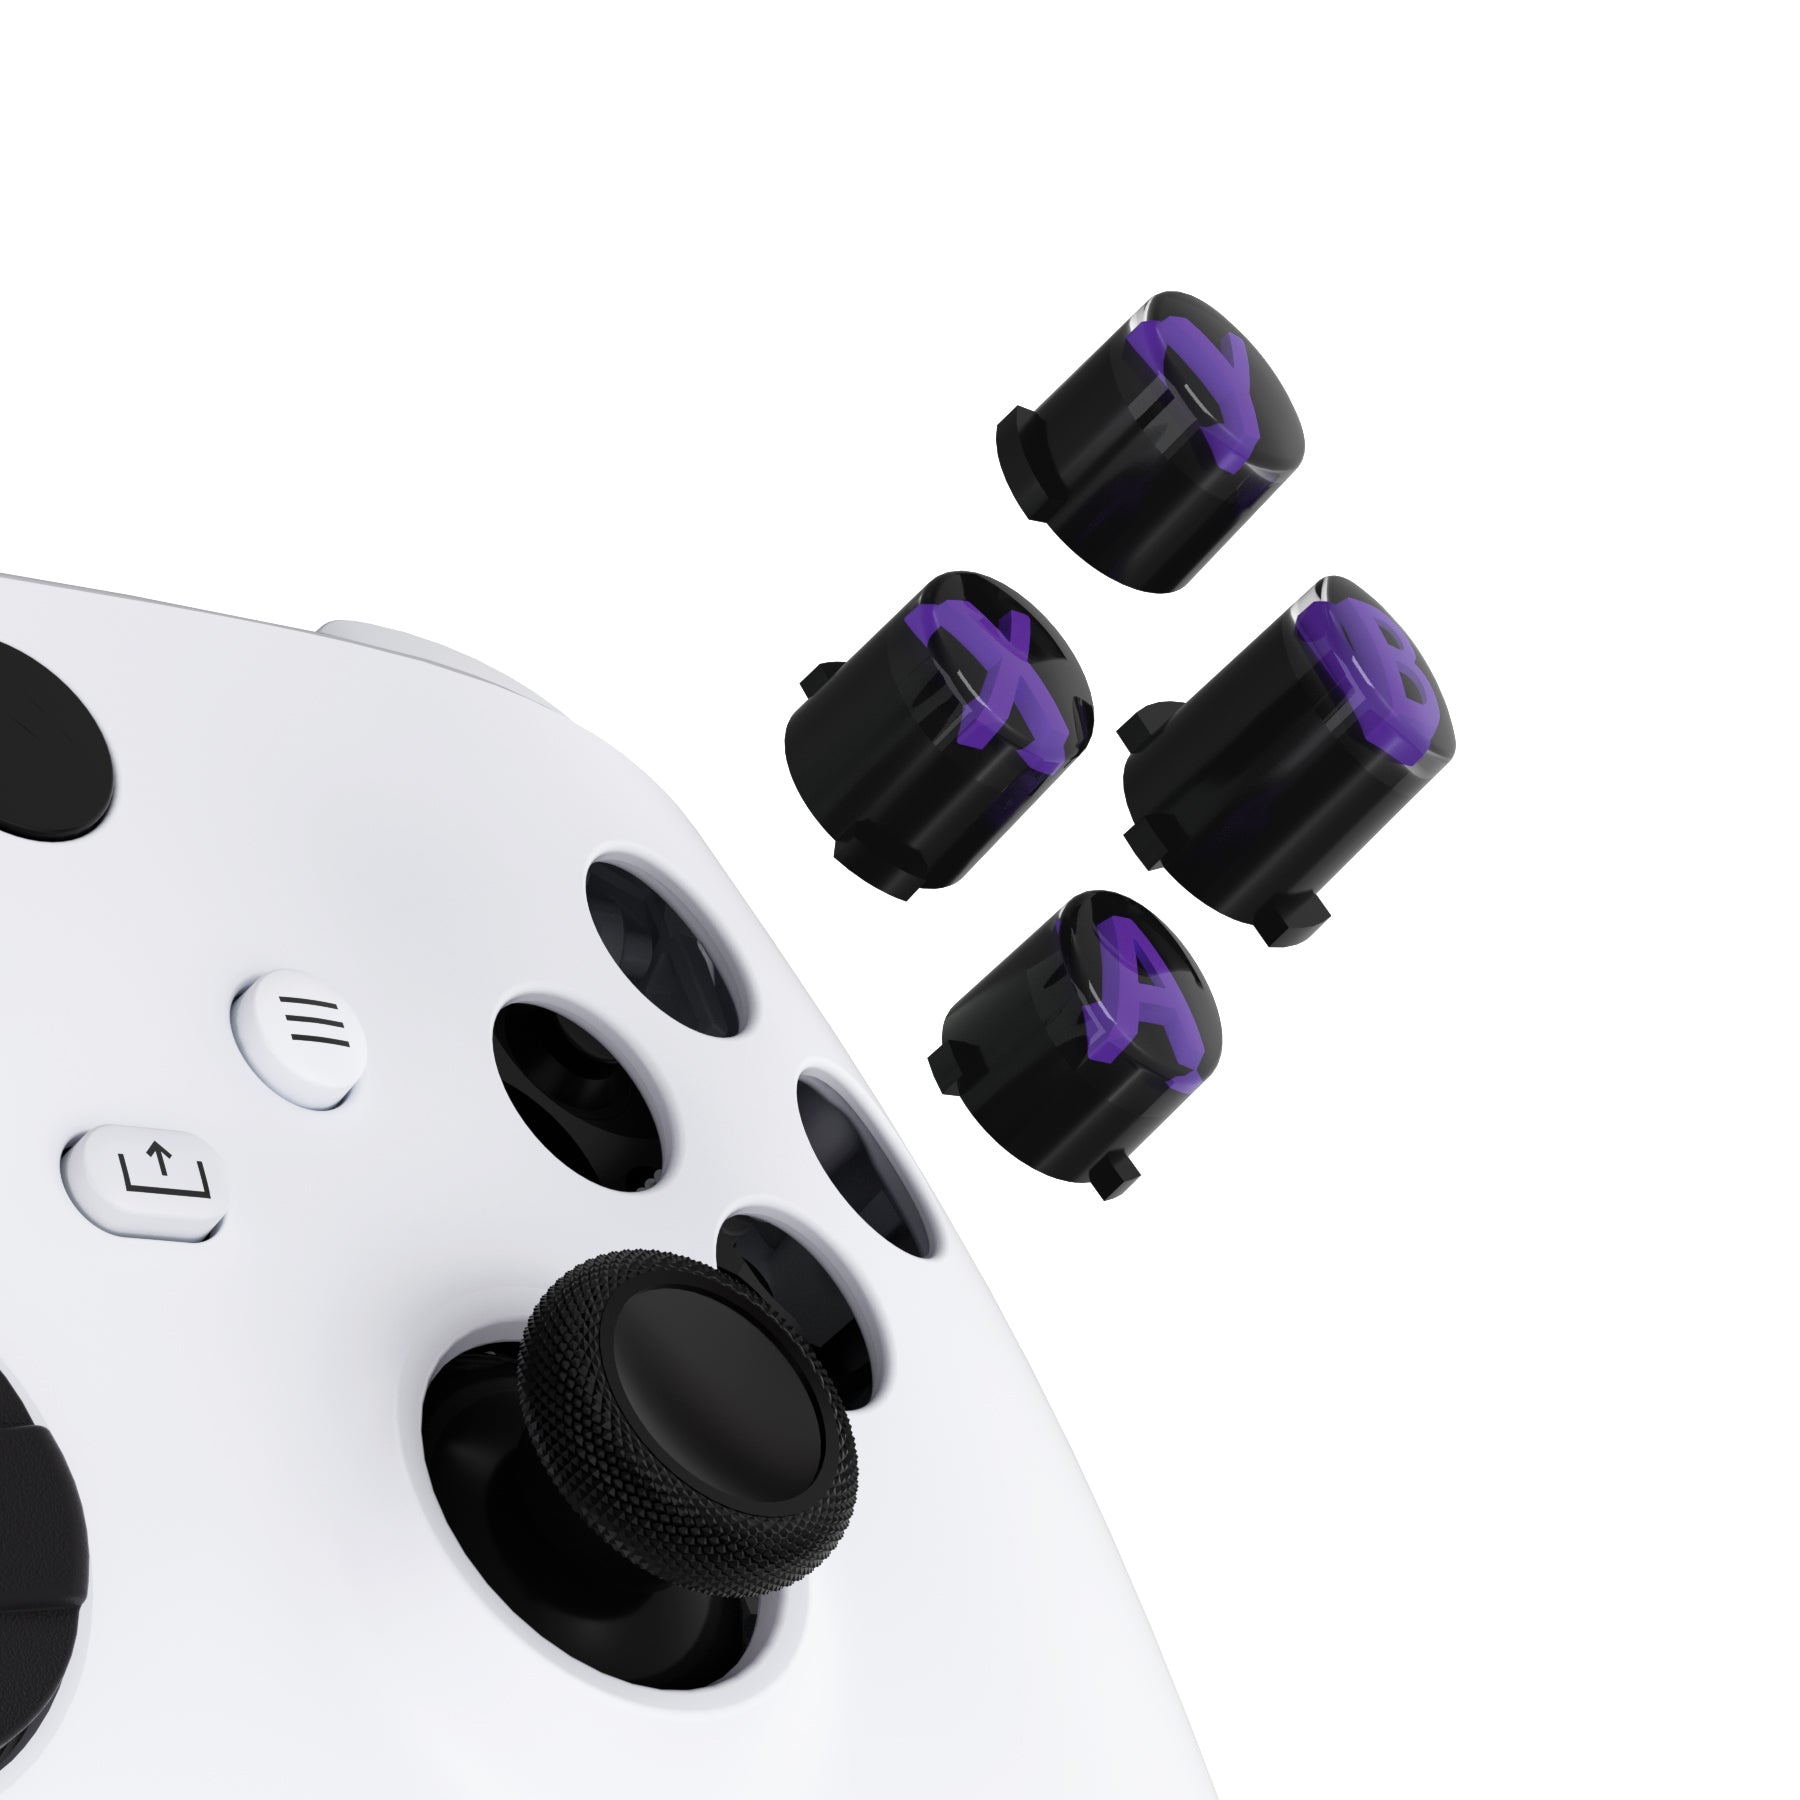 eXtremeRate Retail Three-Tone Black & Clear & Purple ABXY Action Buttons with Classic Symbols for Xbox Series X & S Controller & Xbox One S/X & Xbox One Elite V1/V2 Controller - JDX3M006